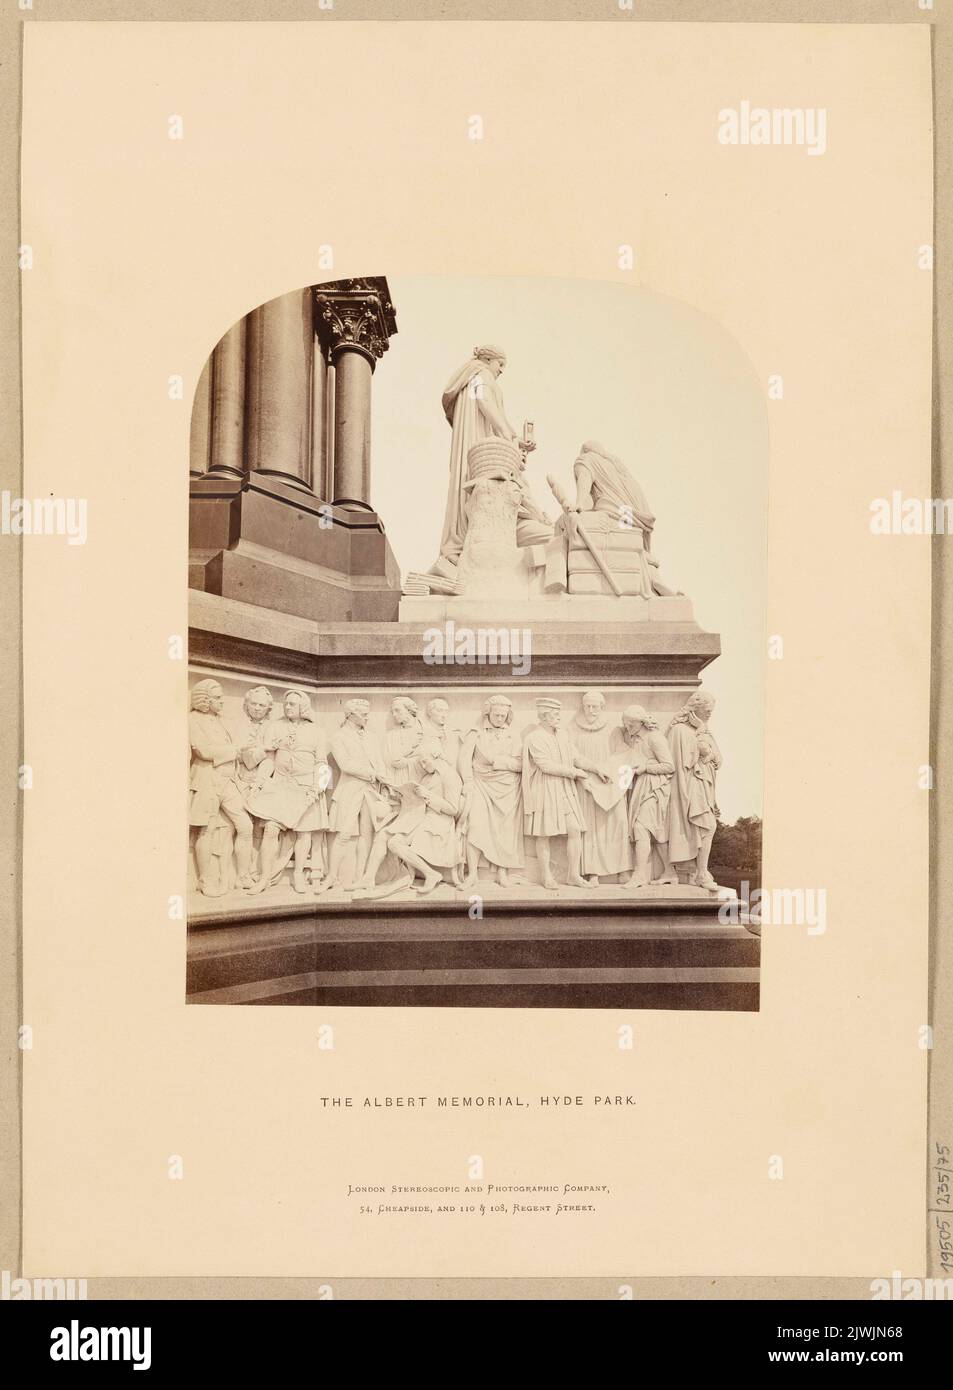 Albert Memorial in London. Fragment of sculptured frieze featuring musicians and the figural group “Production'. Weekes, Henry (1807-1877), sculptor, unknown, photographer, London Stereoscopic and Photographic Company (Londyn ; firma fotograficzna ; 1854-1922), photo studio Stock Photo